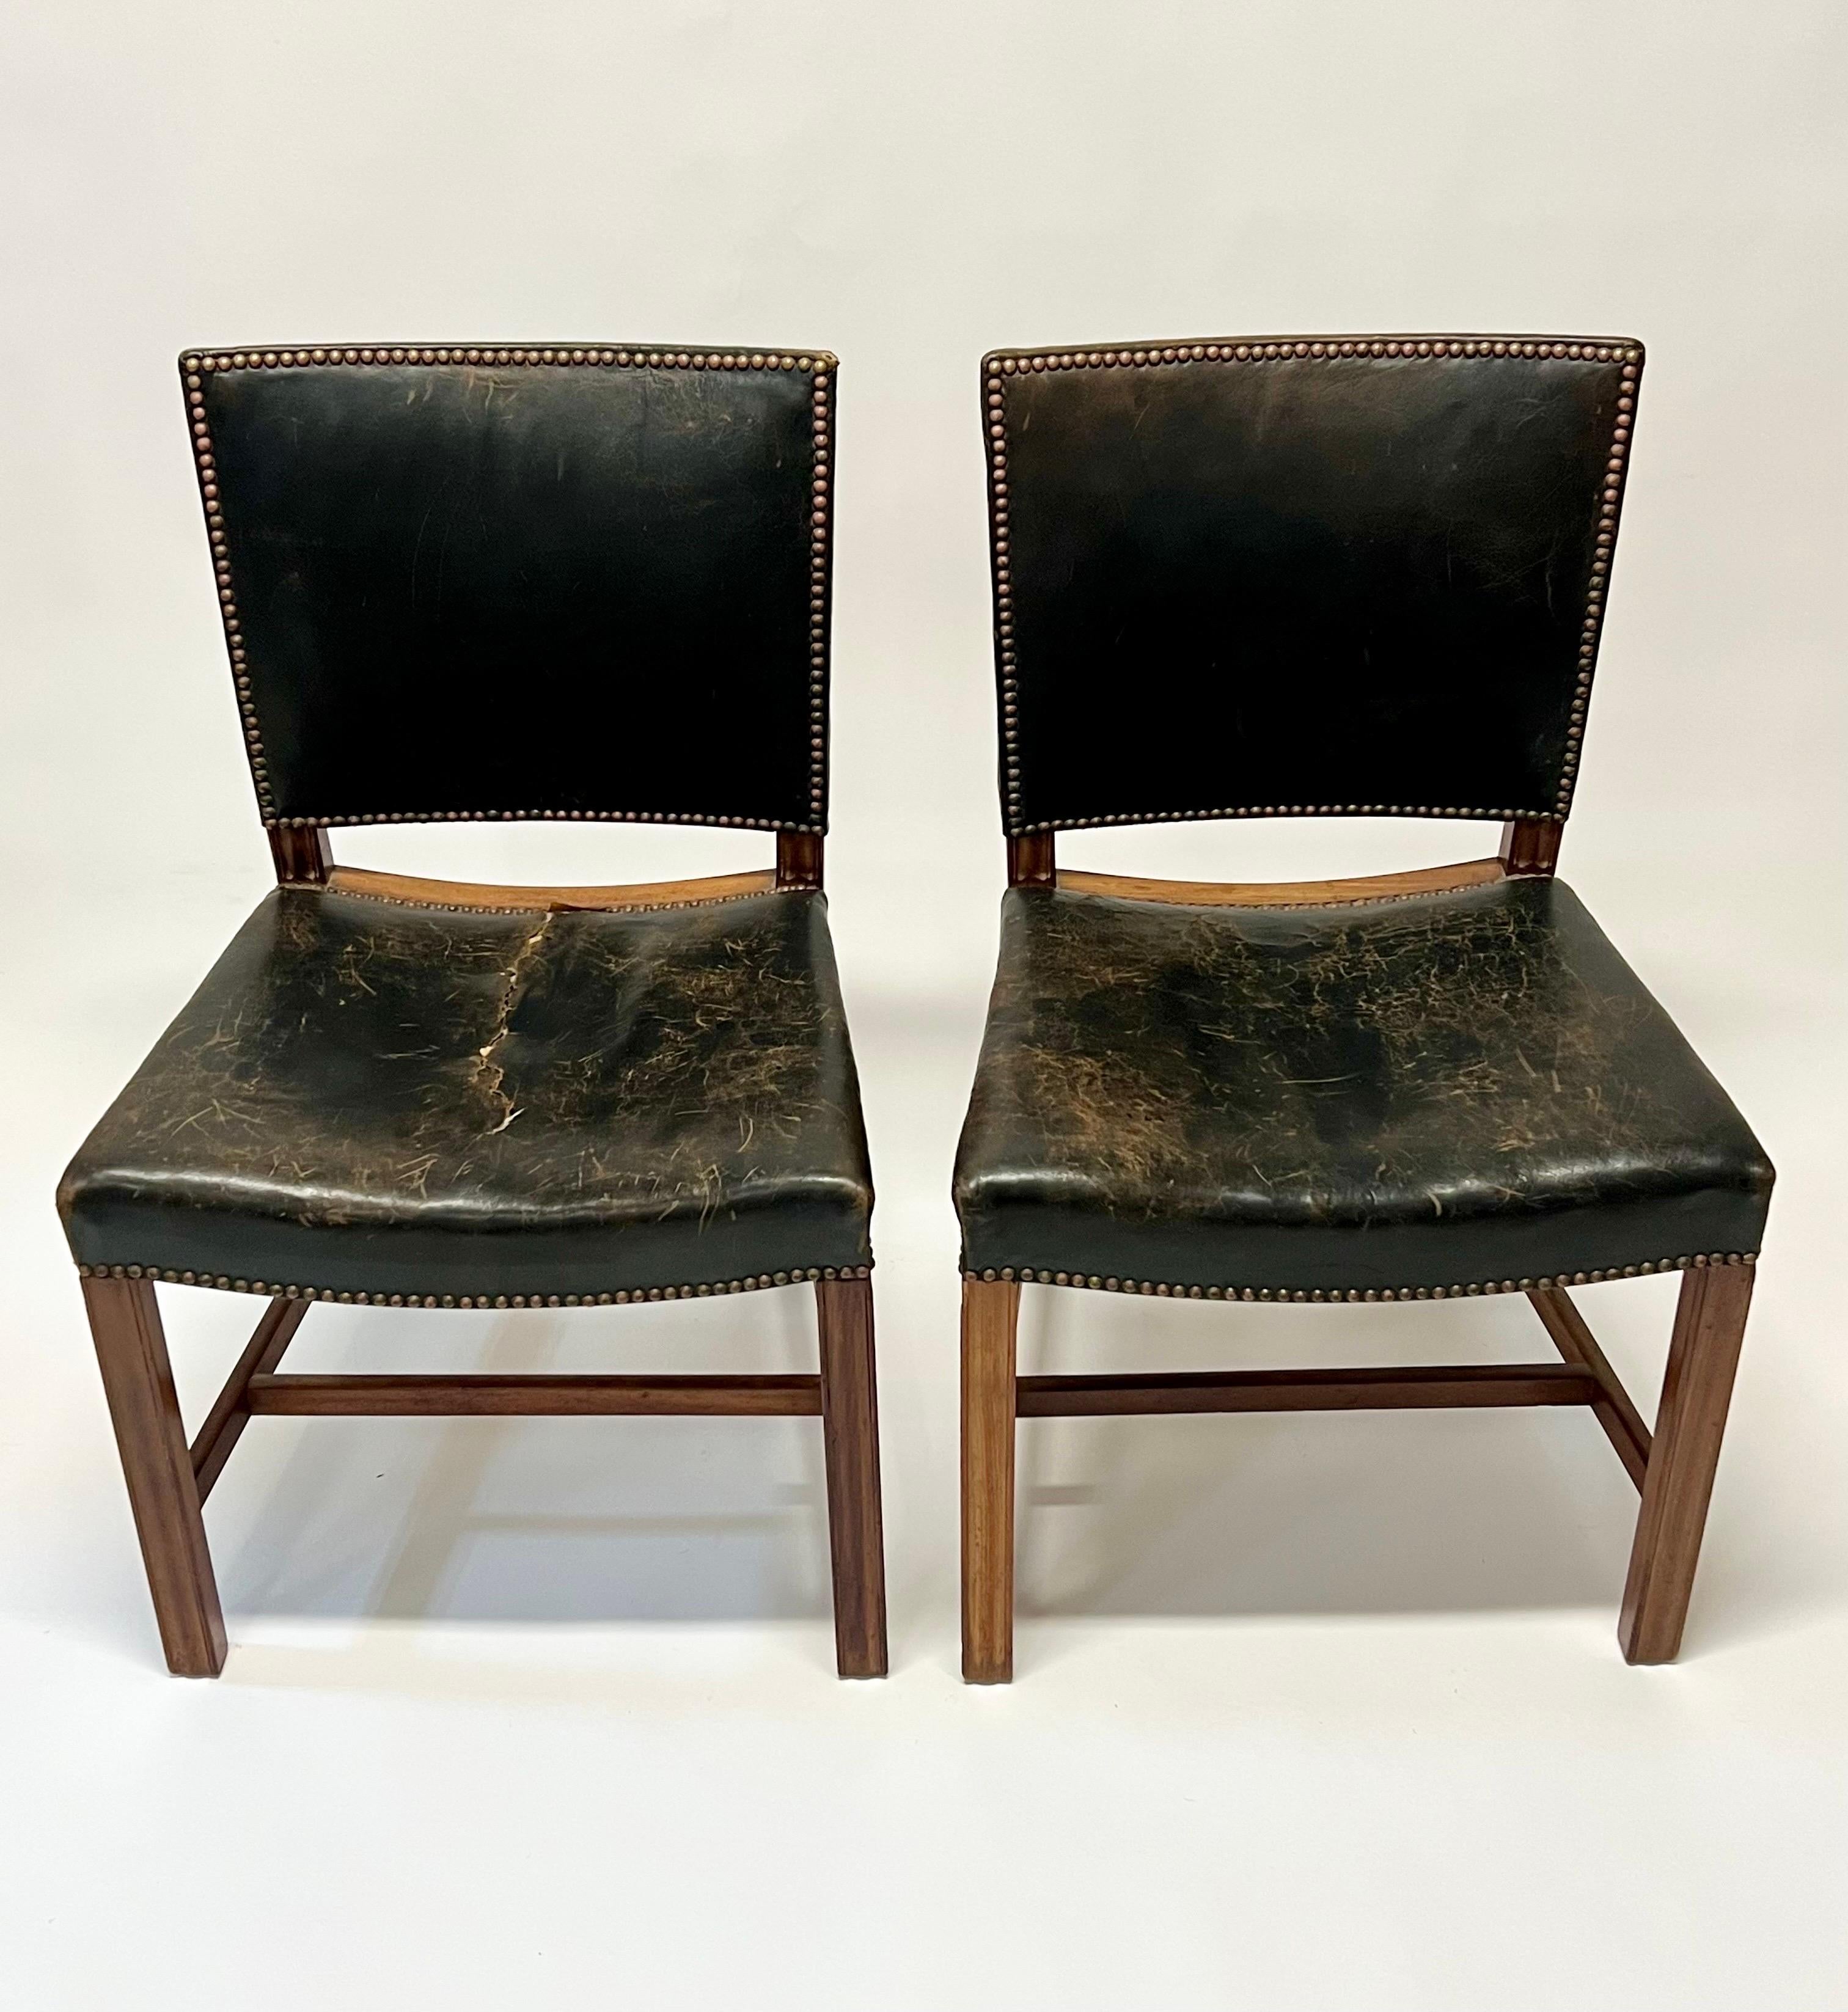 Modern Early Kaare Klint Red Chairs in Cuban Mahogany, circa 1930s For Sale